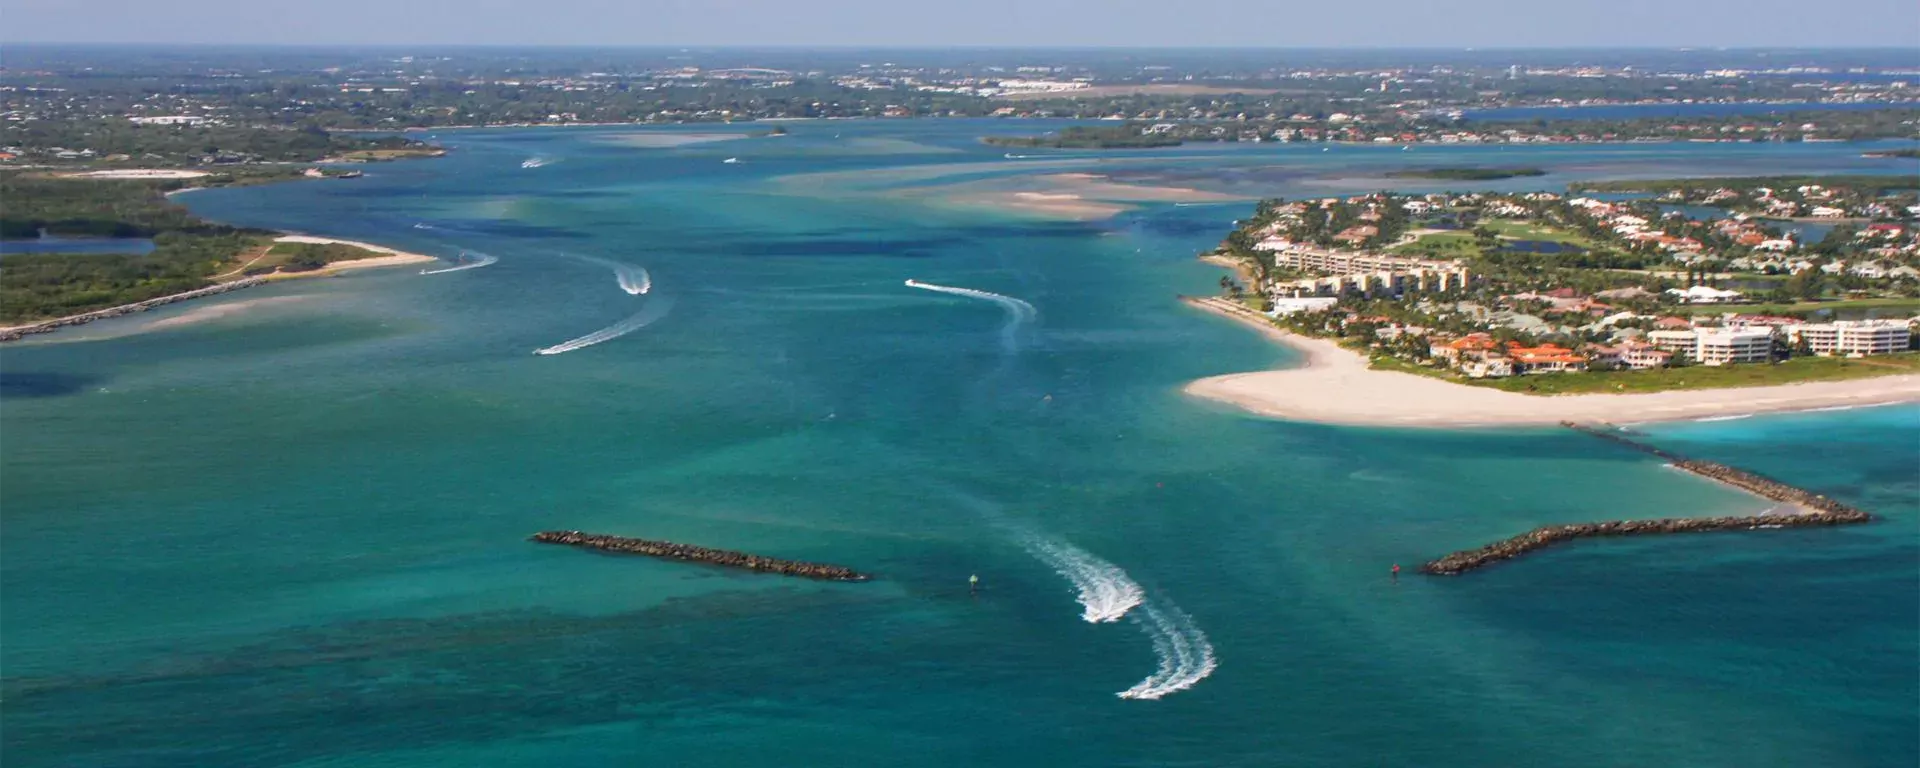 St. Lucie Inlet